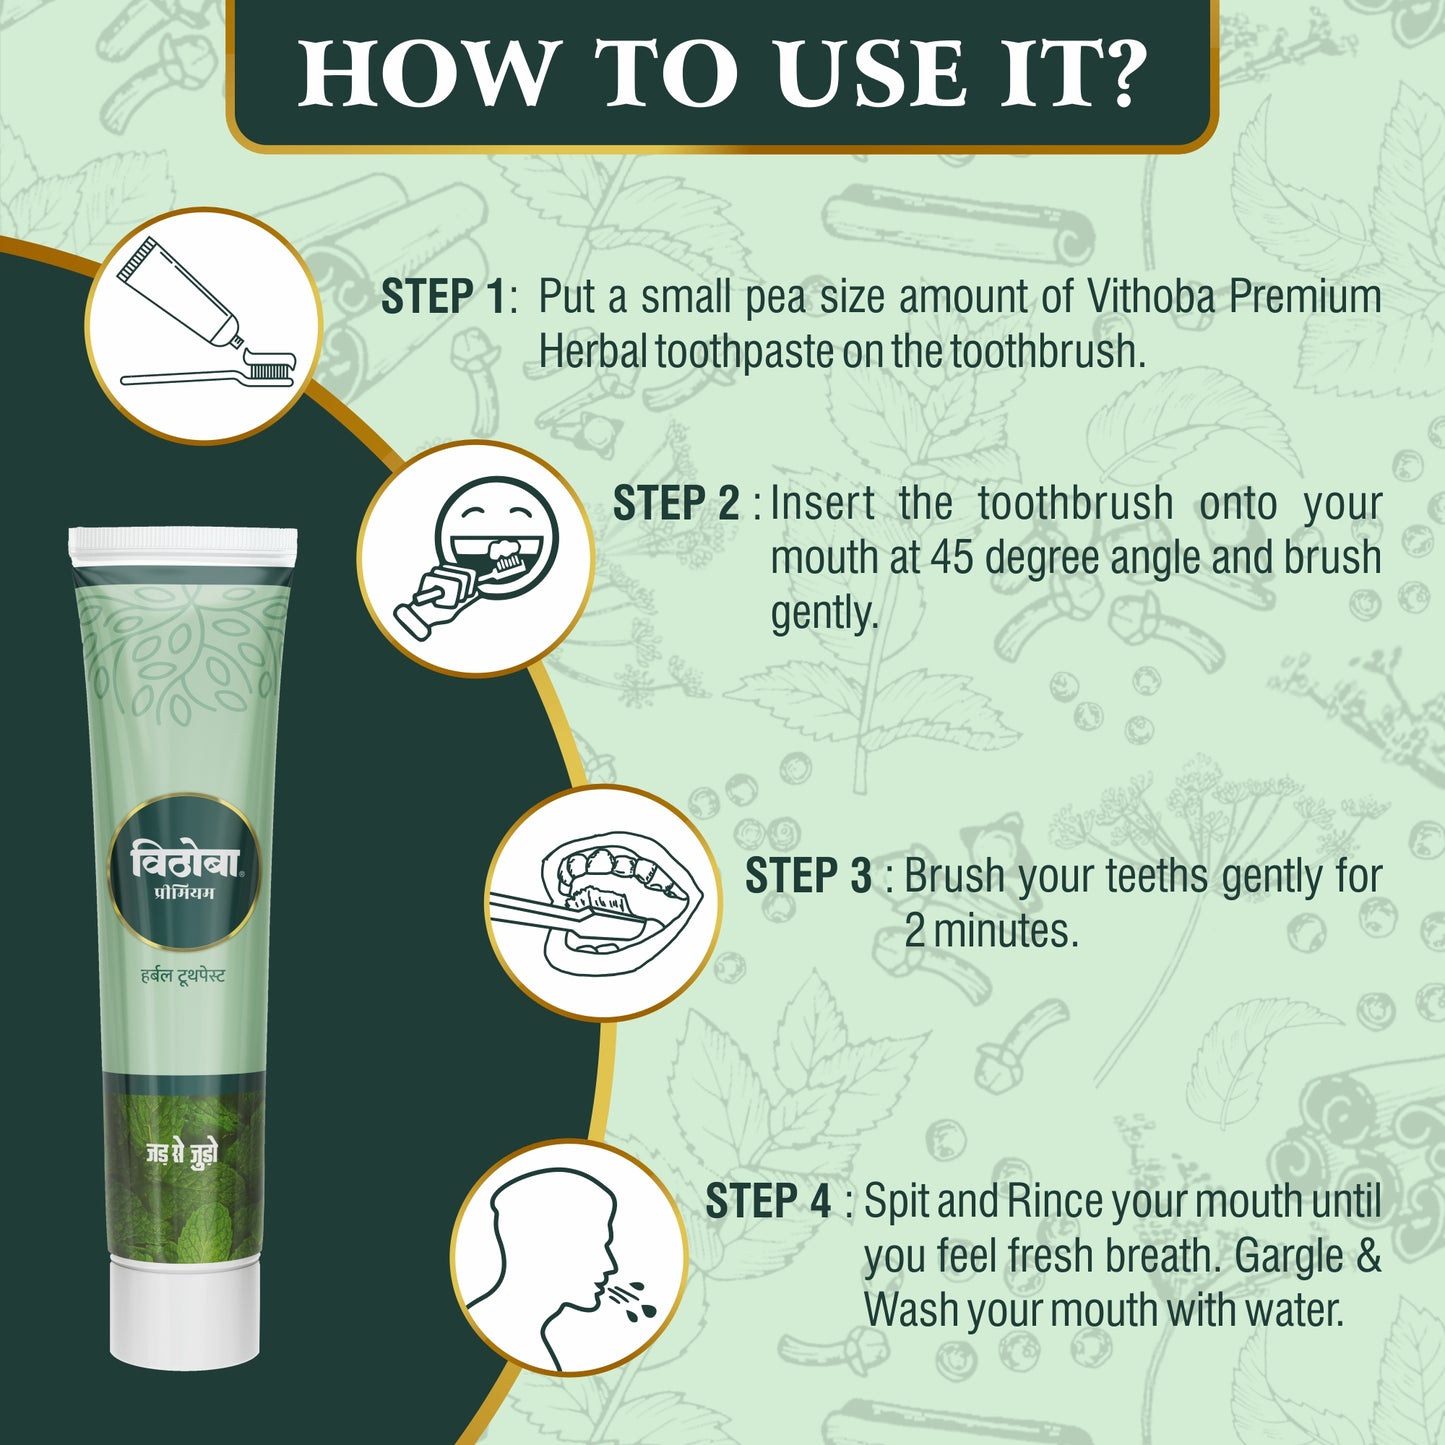 Vithoba Herbal Rootfix Toothpaste & Premium Toothpaste Combo Pack - 80g Each